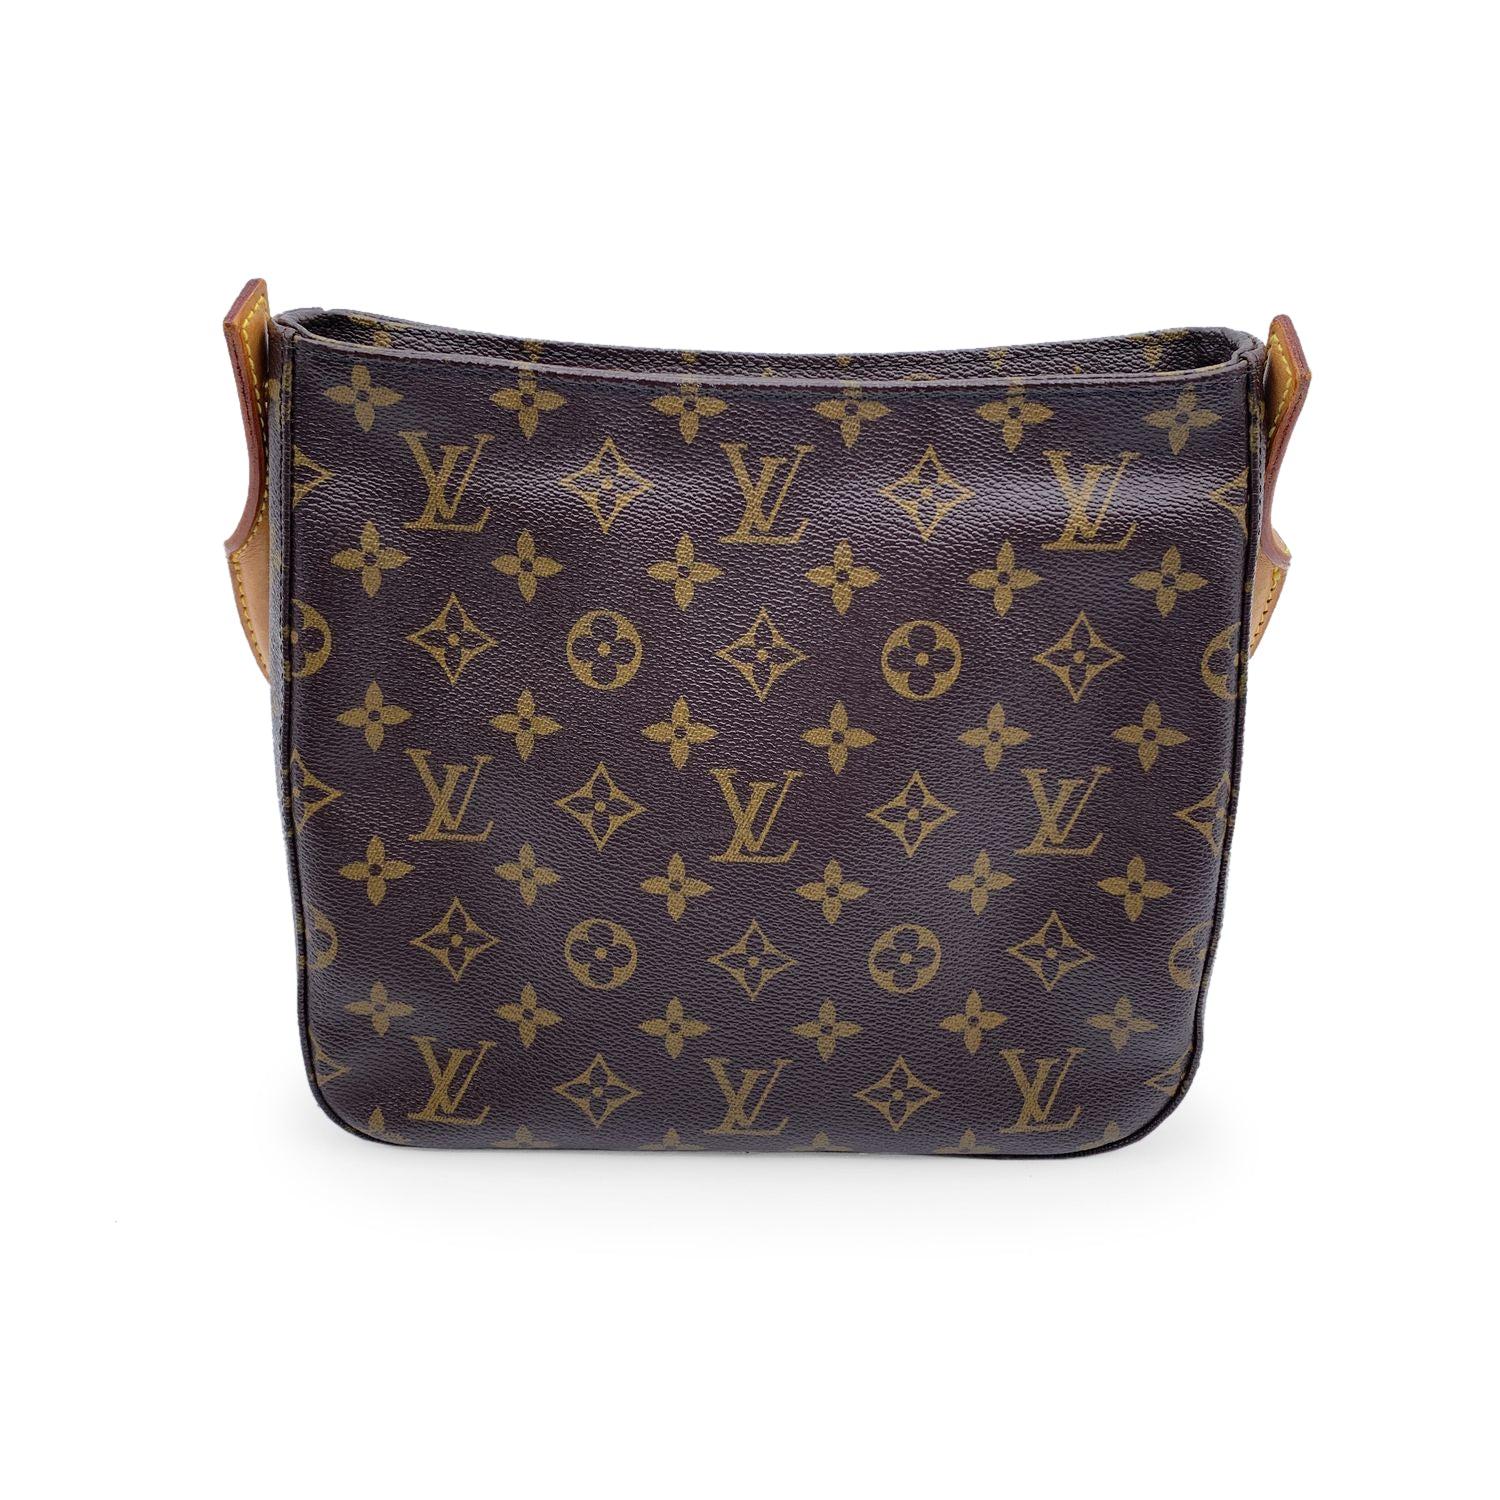 Louis Vuitton Monogram Canvas Looping MM Shoulder Bag M51146 In Excellent Condition For Sale In Rome, Rome